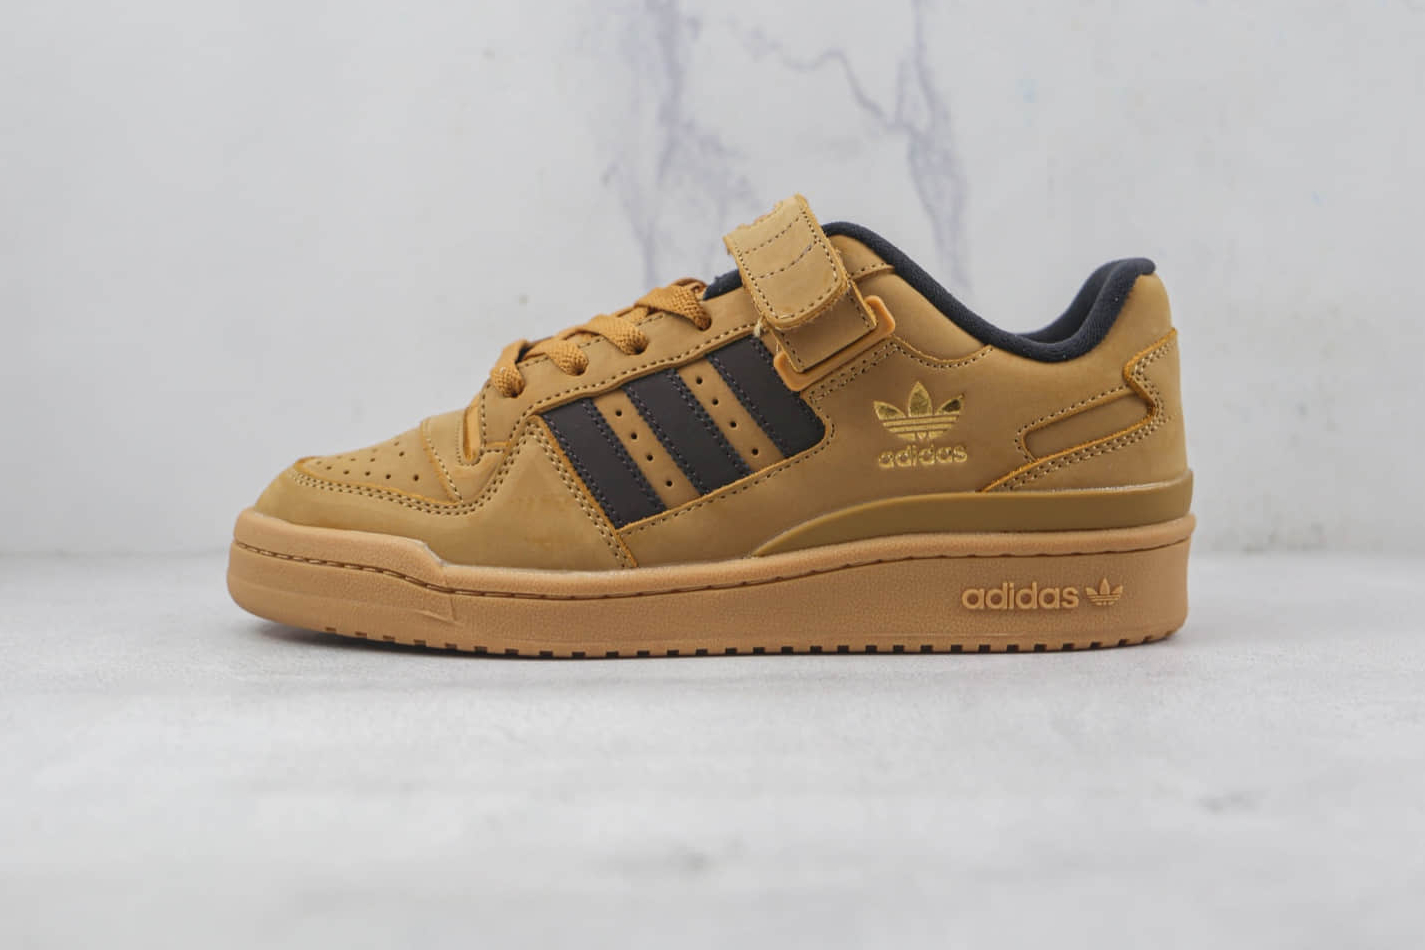 Adidas Originals Forum Low GW6230 - Iconic Low-Top Sneakers | Limited Edition